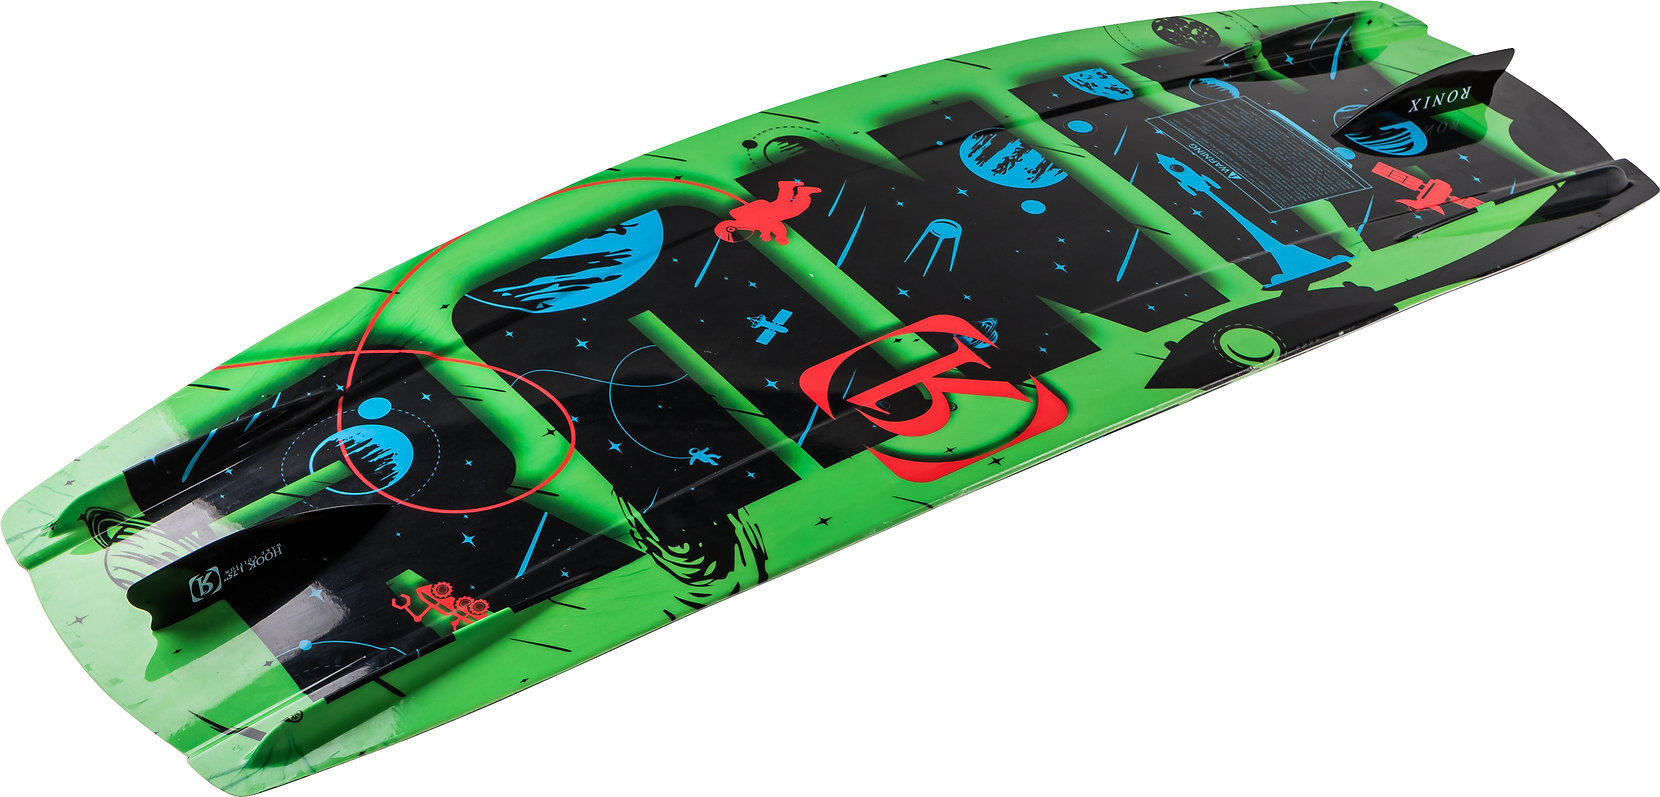 2022 Ronix Vision Wakeboard + Vision Boots Package